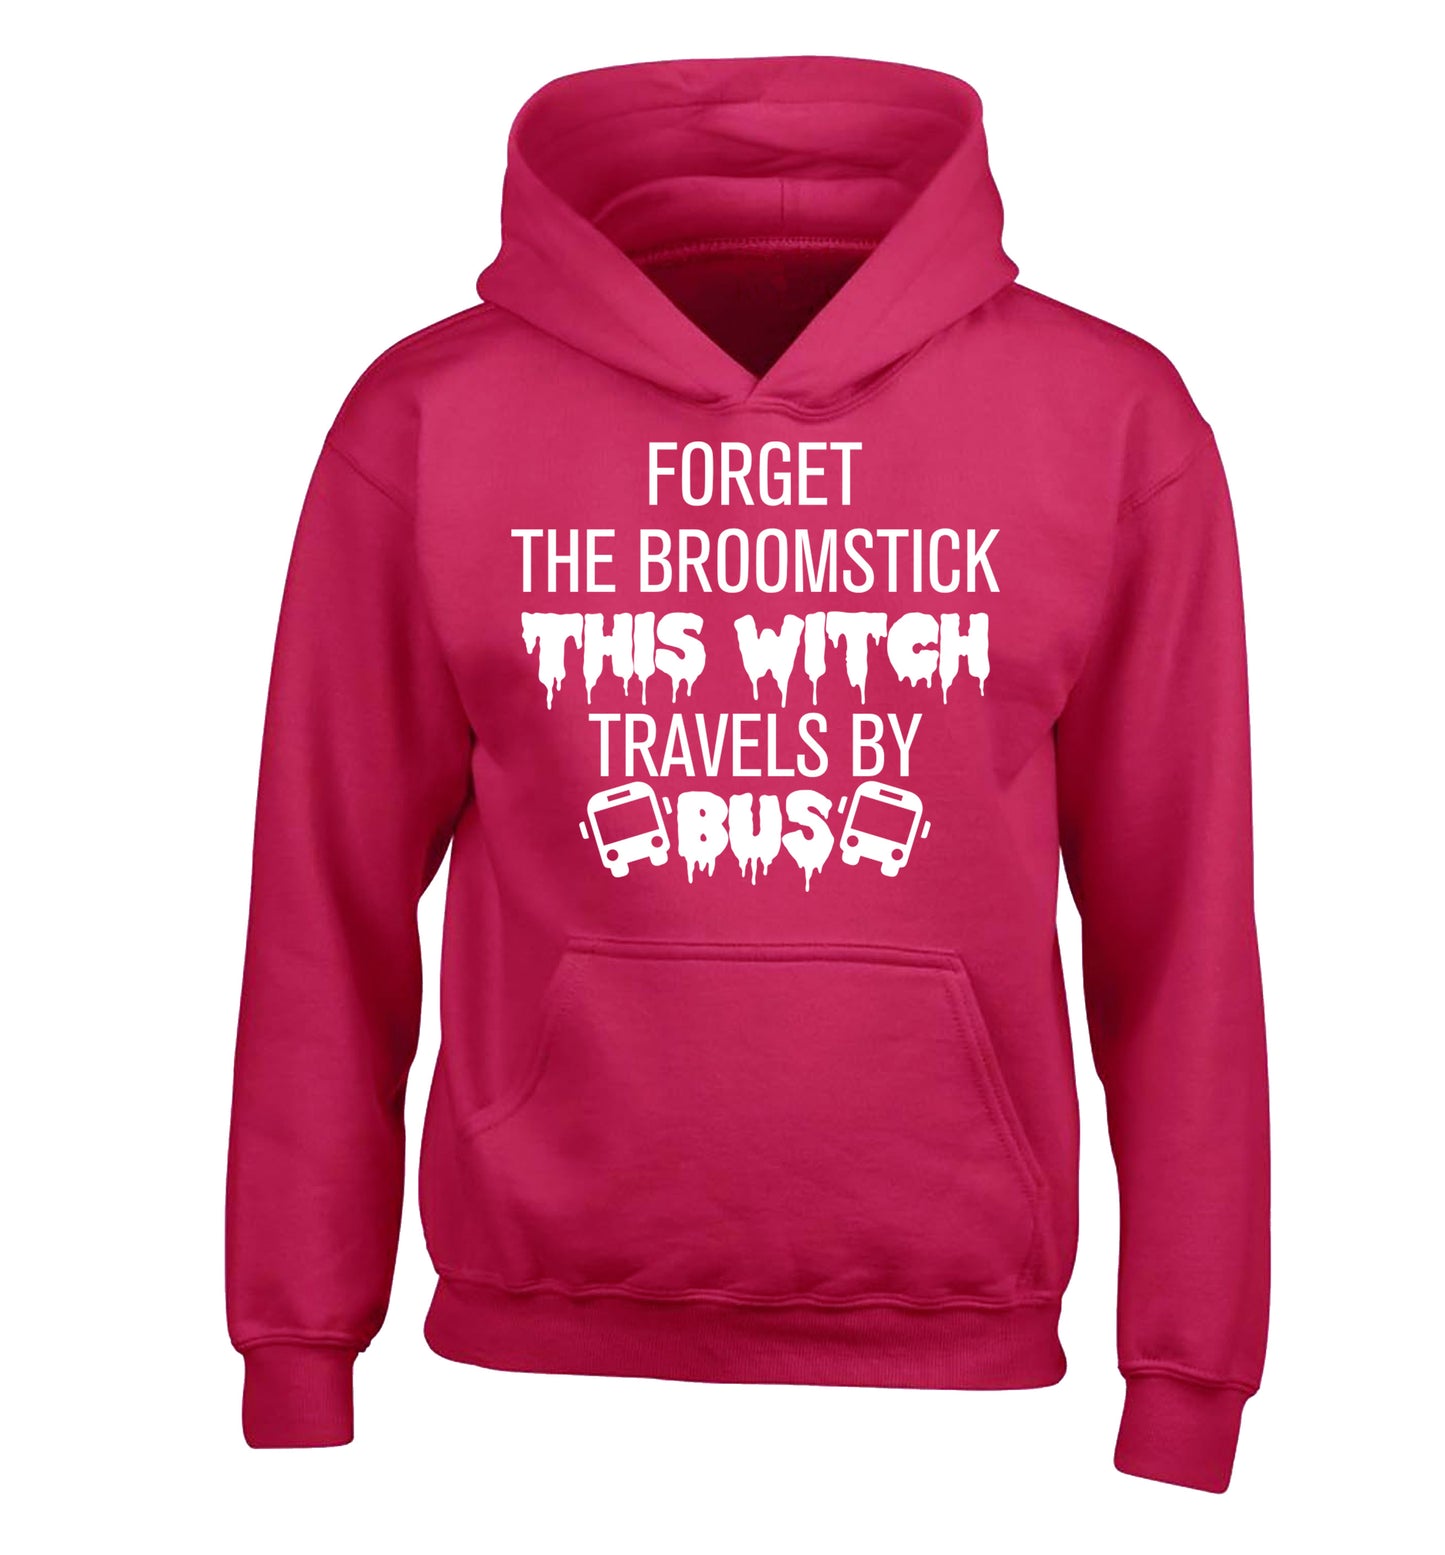 Forget the broomstick this witch travels by bus children's pink hoodie 12-14 Years